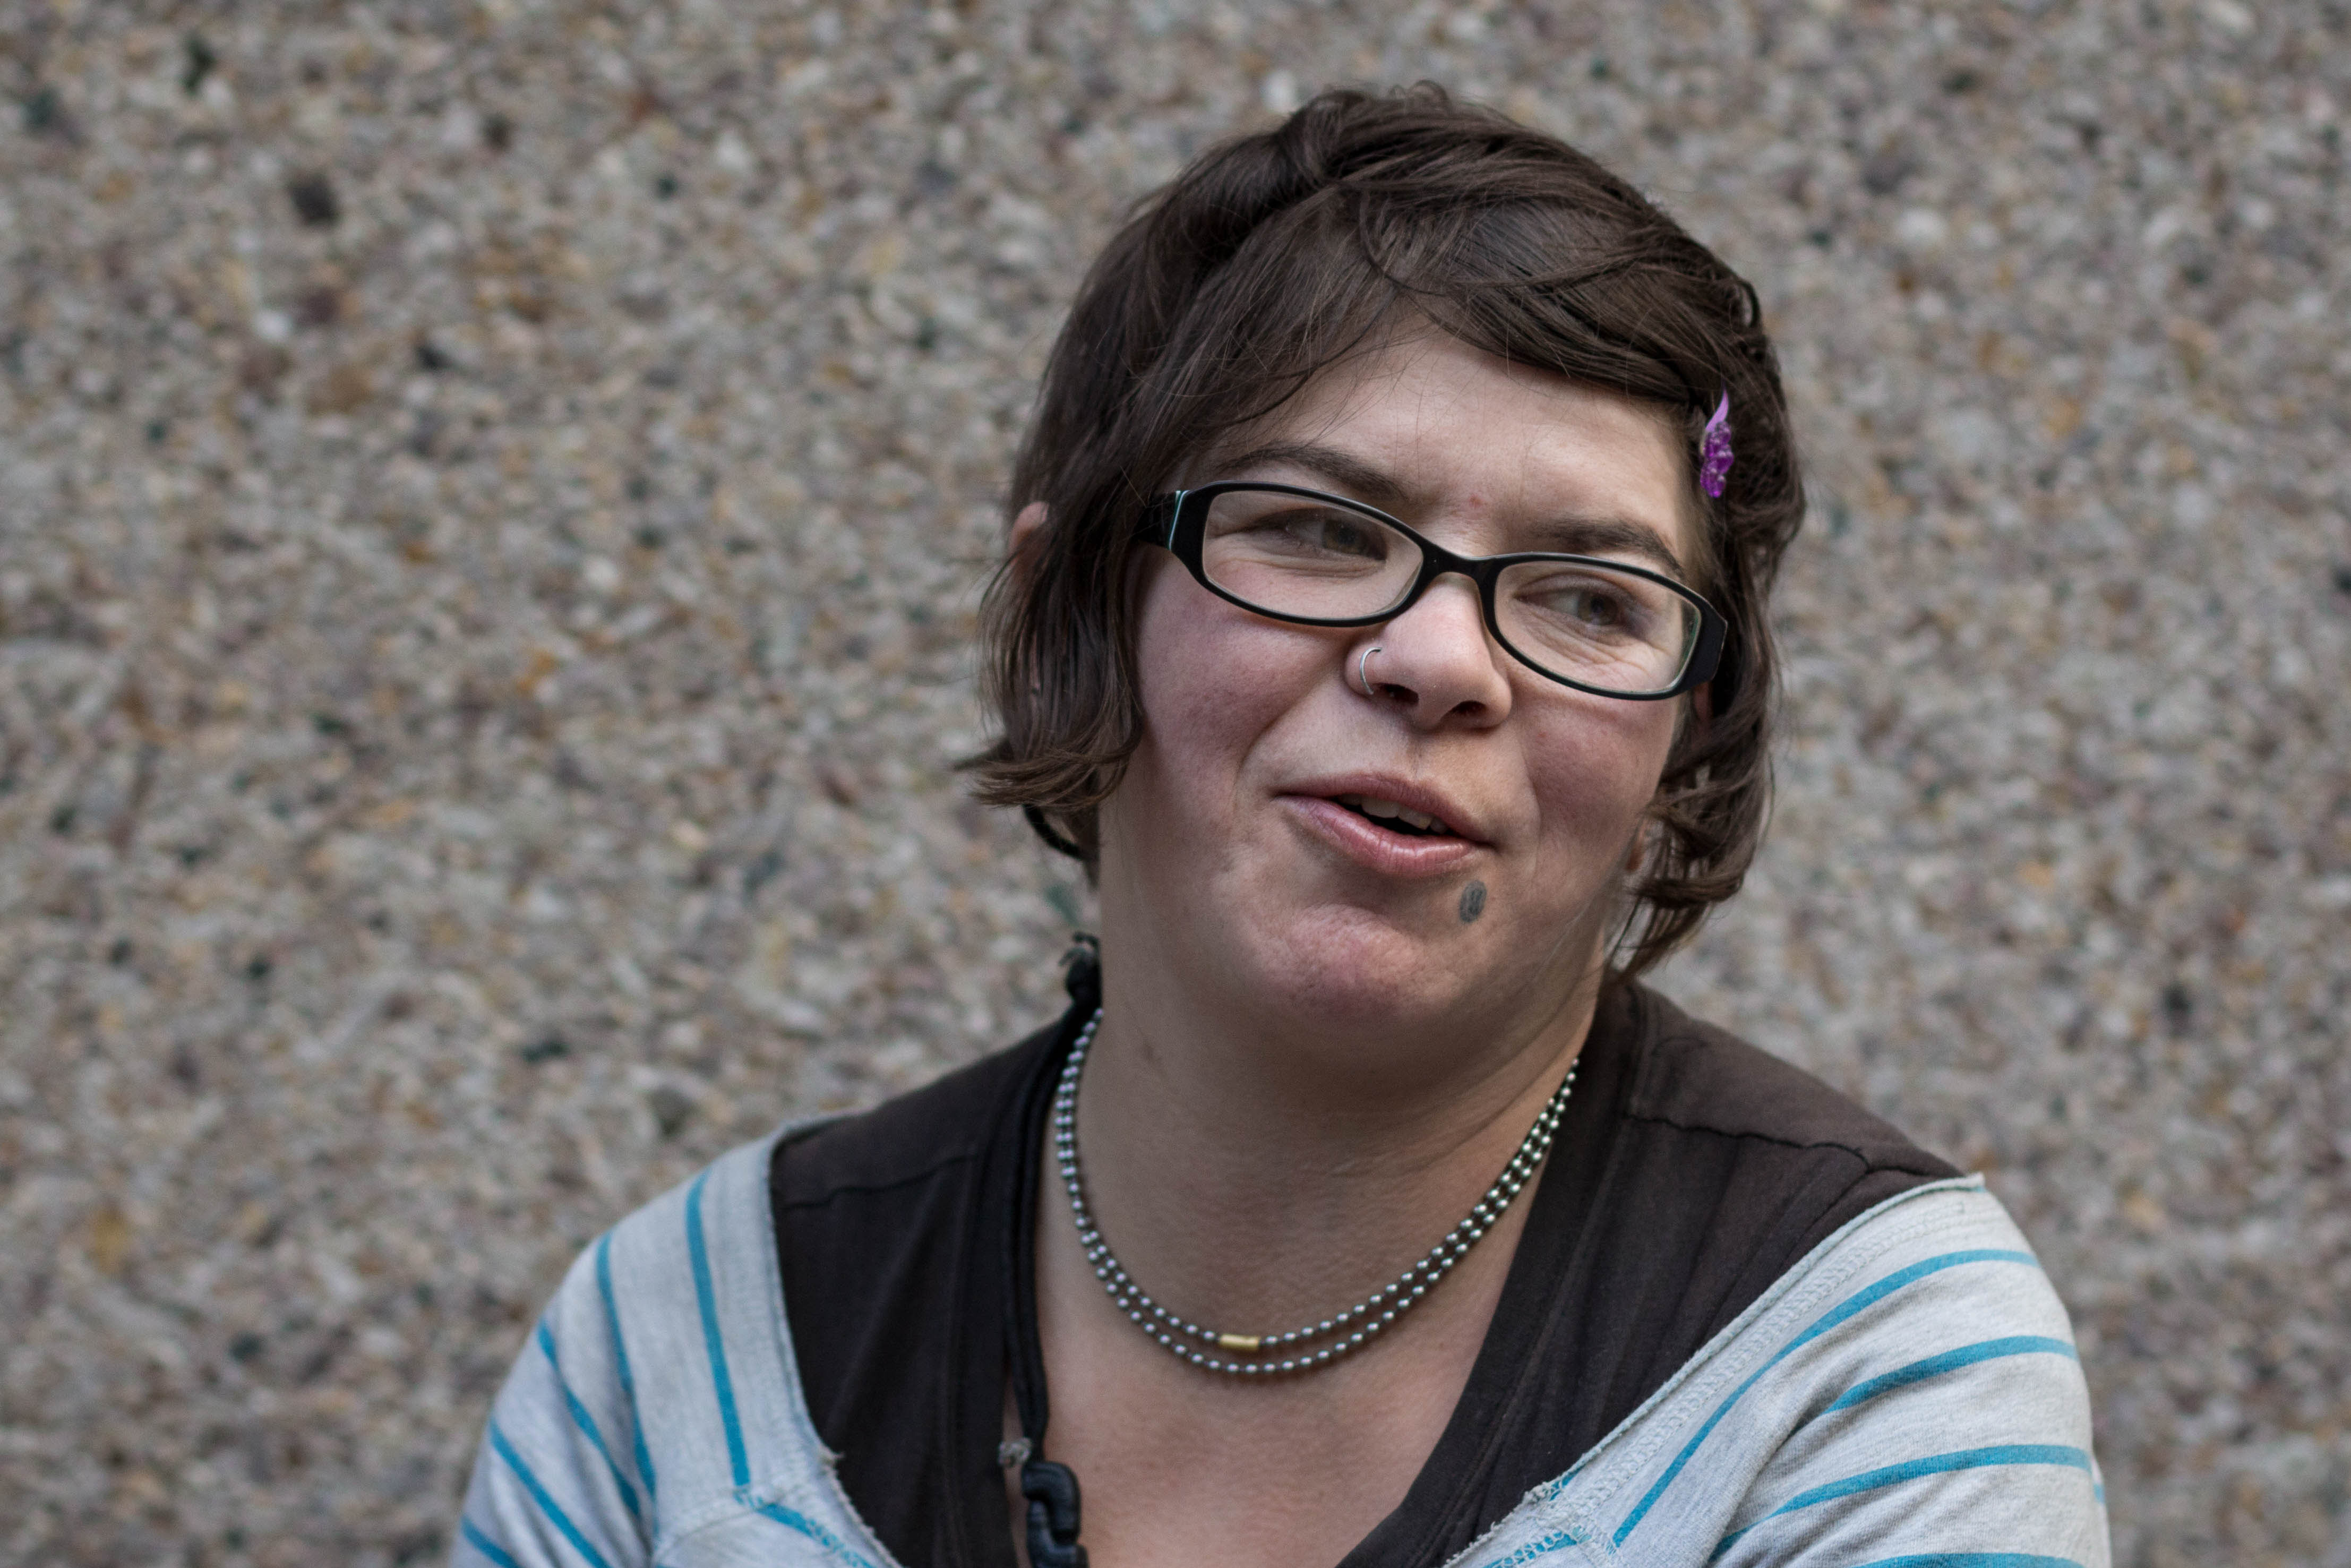 Andreanna "Nana" Zick, 35, addicted to alcohol. Wants to go to school for forestry. Roosevelt Sowka/PSU Vanguard